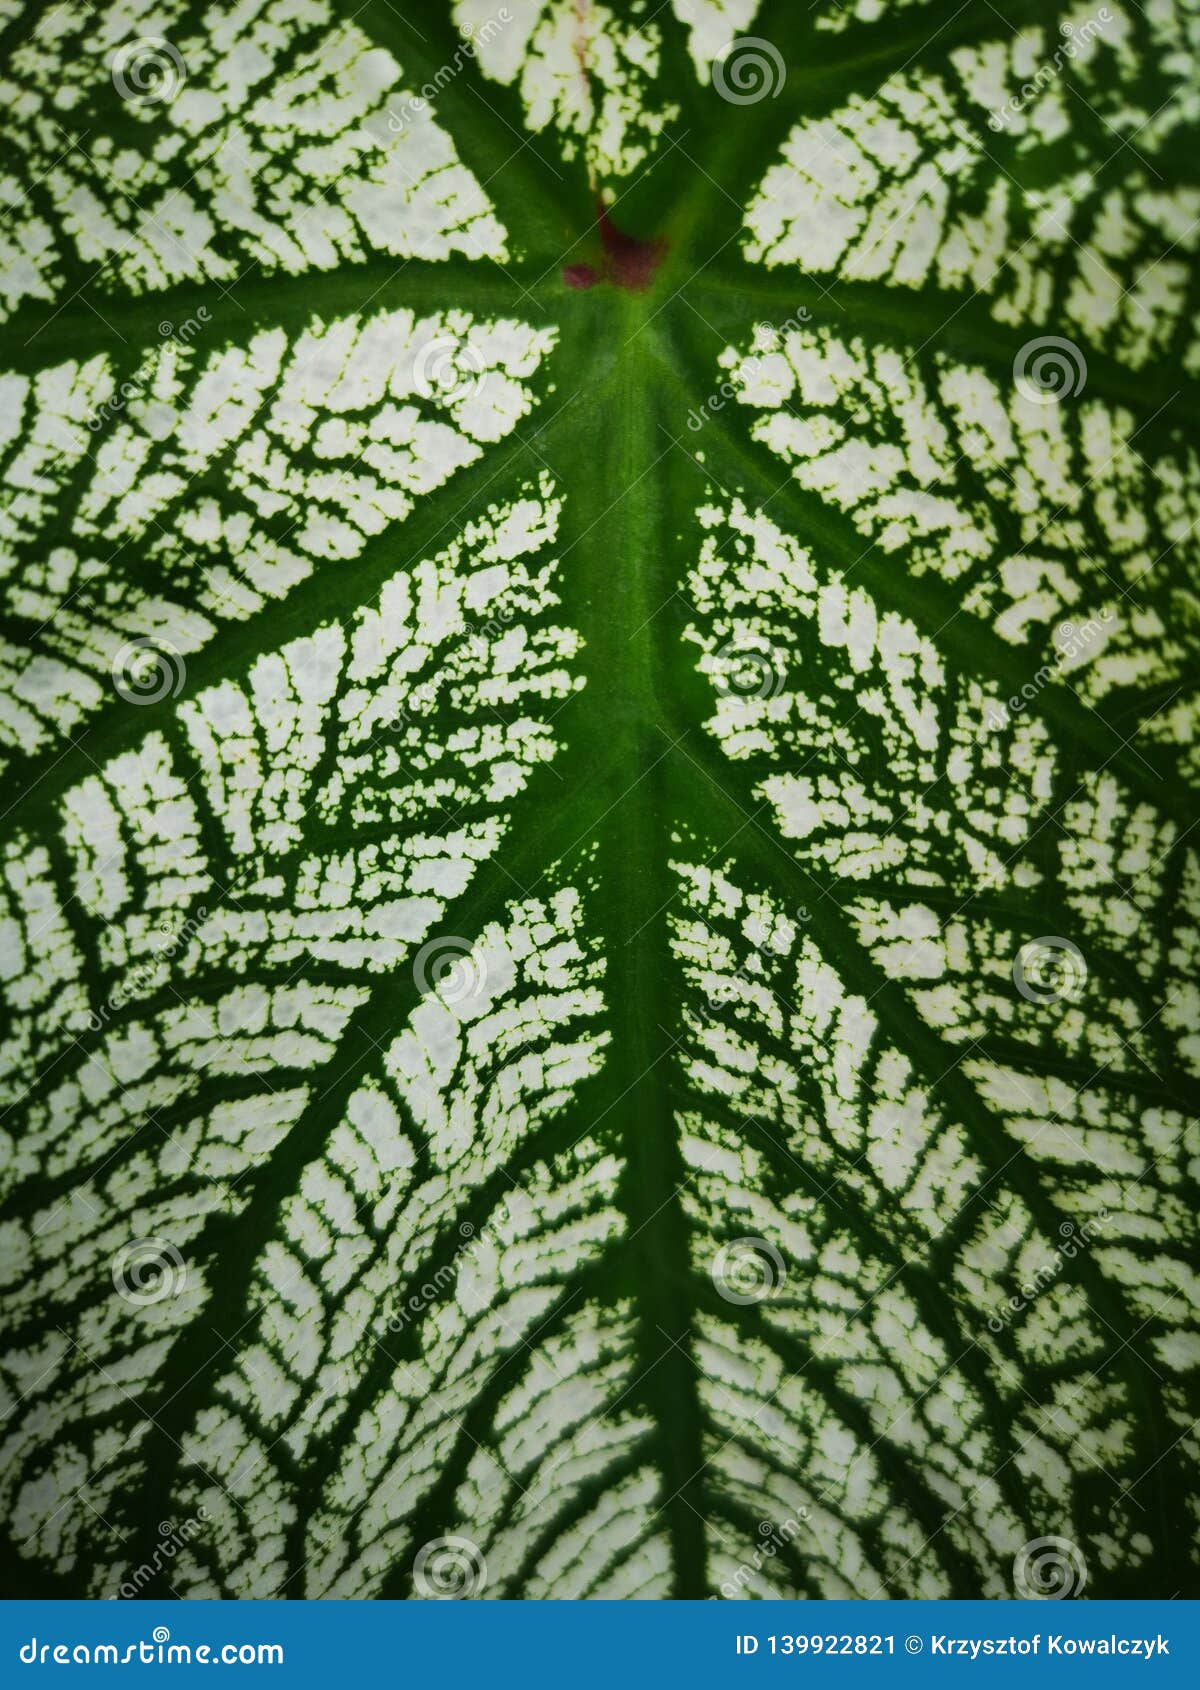 Green and White Tropical Leaf Background Stock Image - Image of color